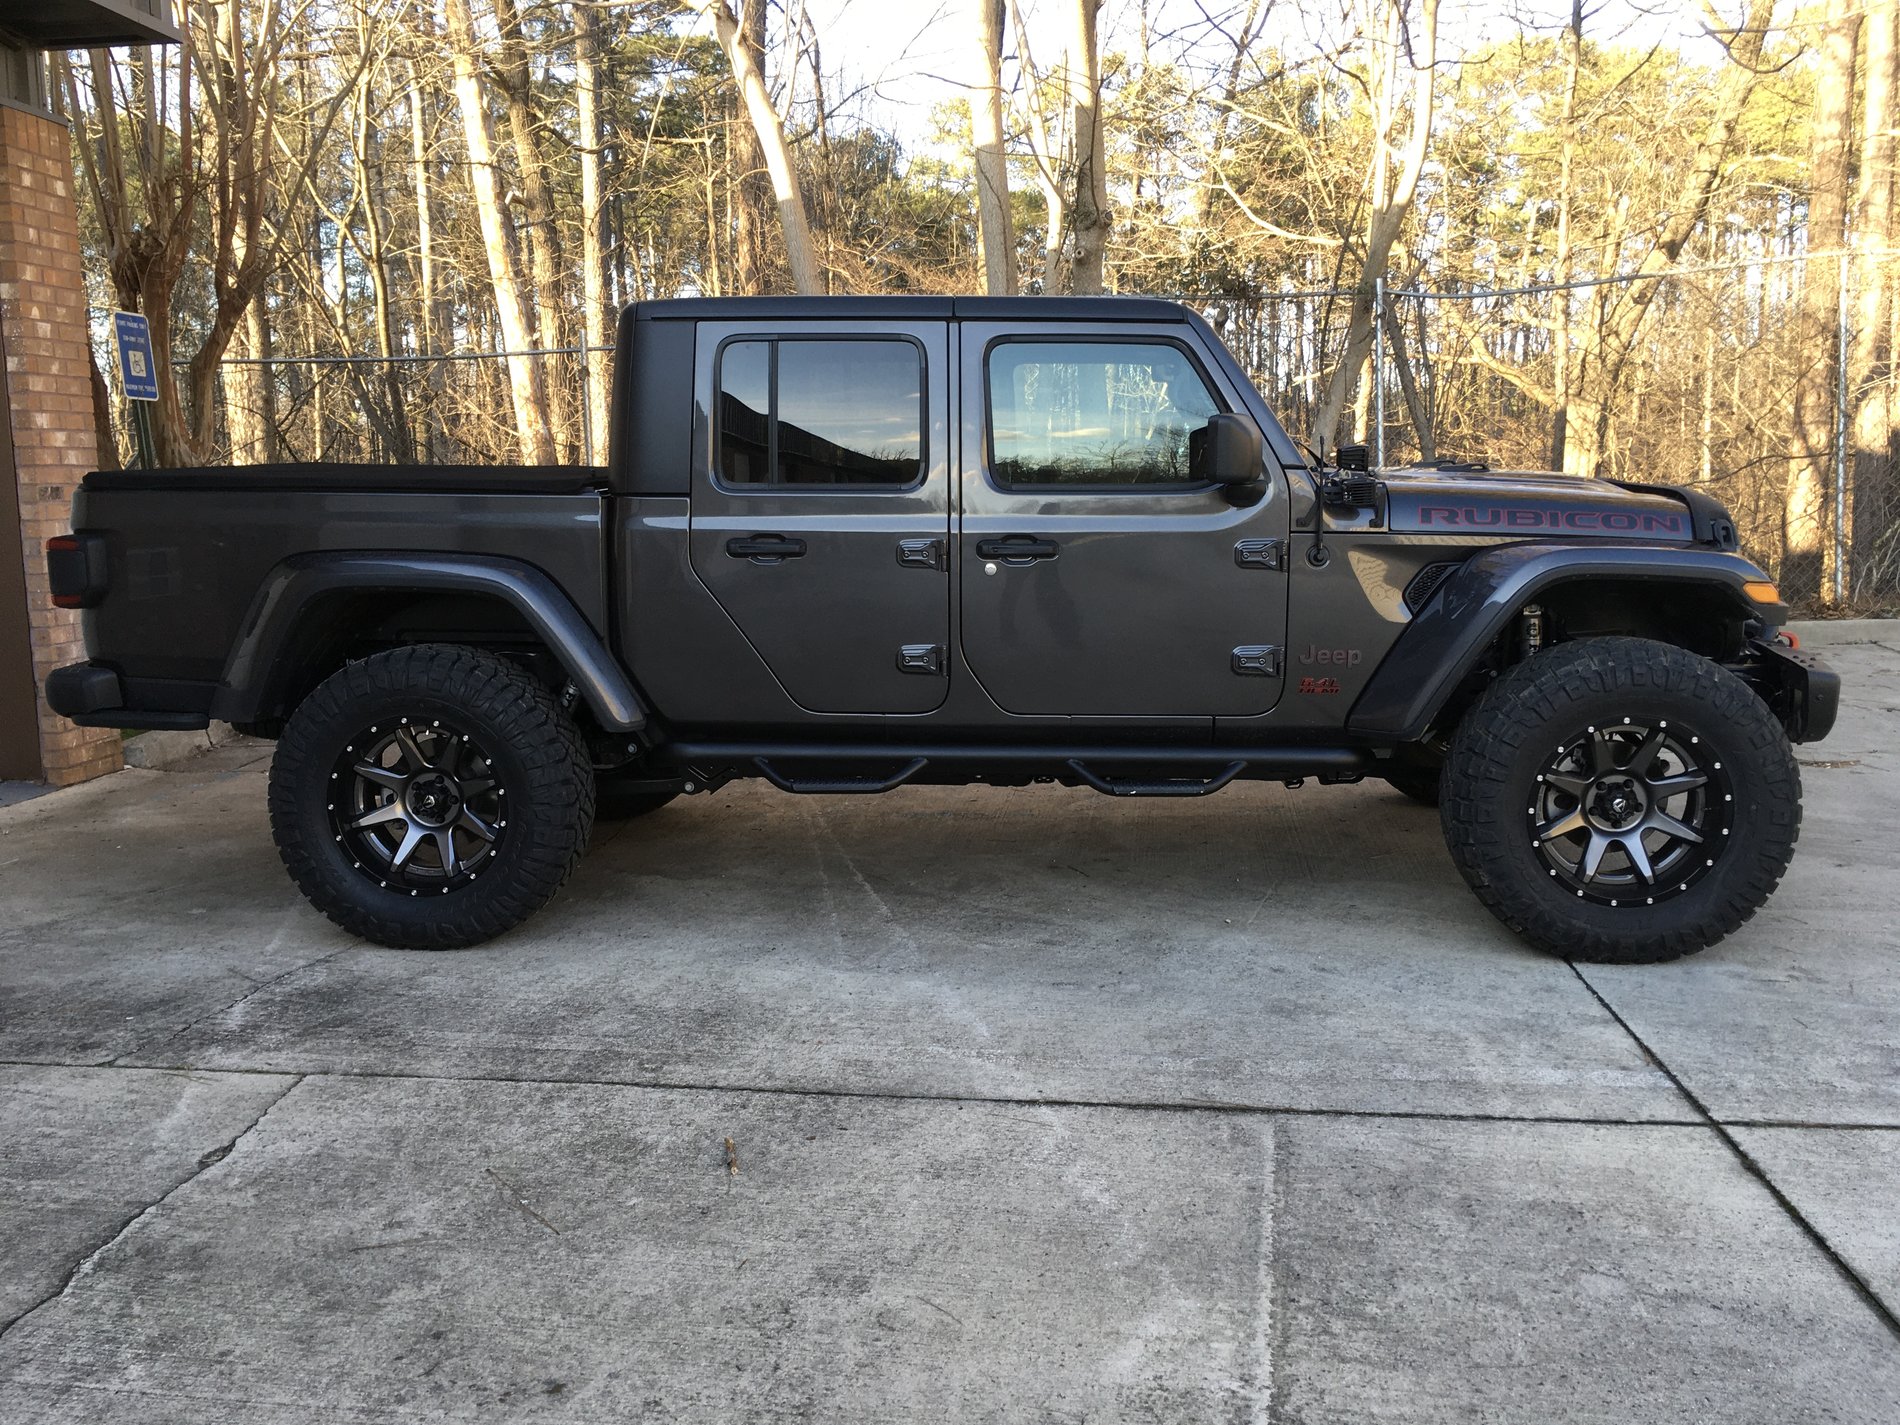 Pictures of 37's on your gladiator | Jeep Gladiator Forum ...